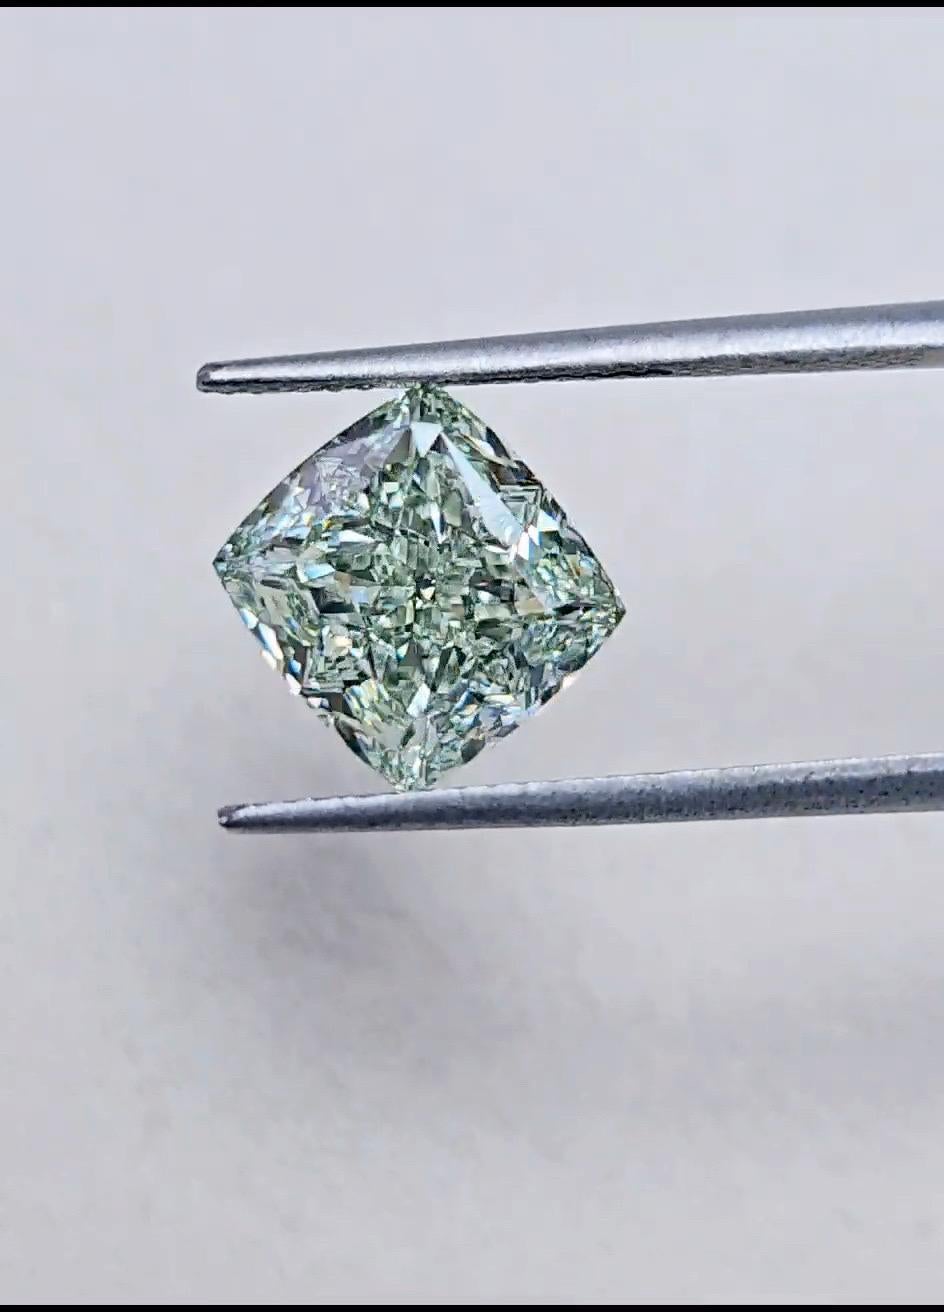  From Emilio Jewelry, a well known and respected wholesaler/dealer located on New York’s iconic Fifth Avenue, 

Green diamonds are considered special and rare due to their unique color and limited availability. Here are a few reasons why green